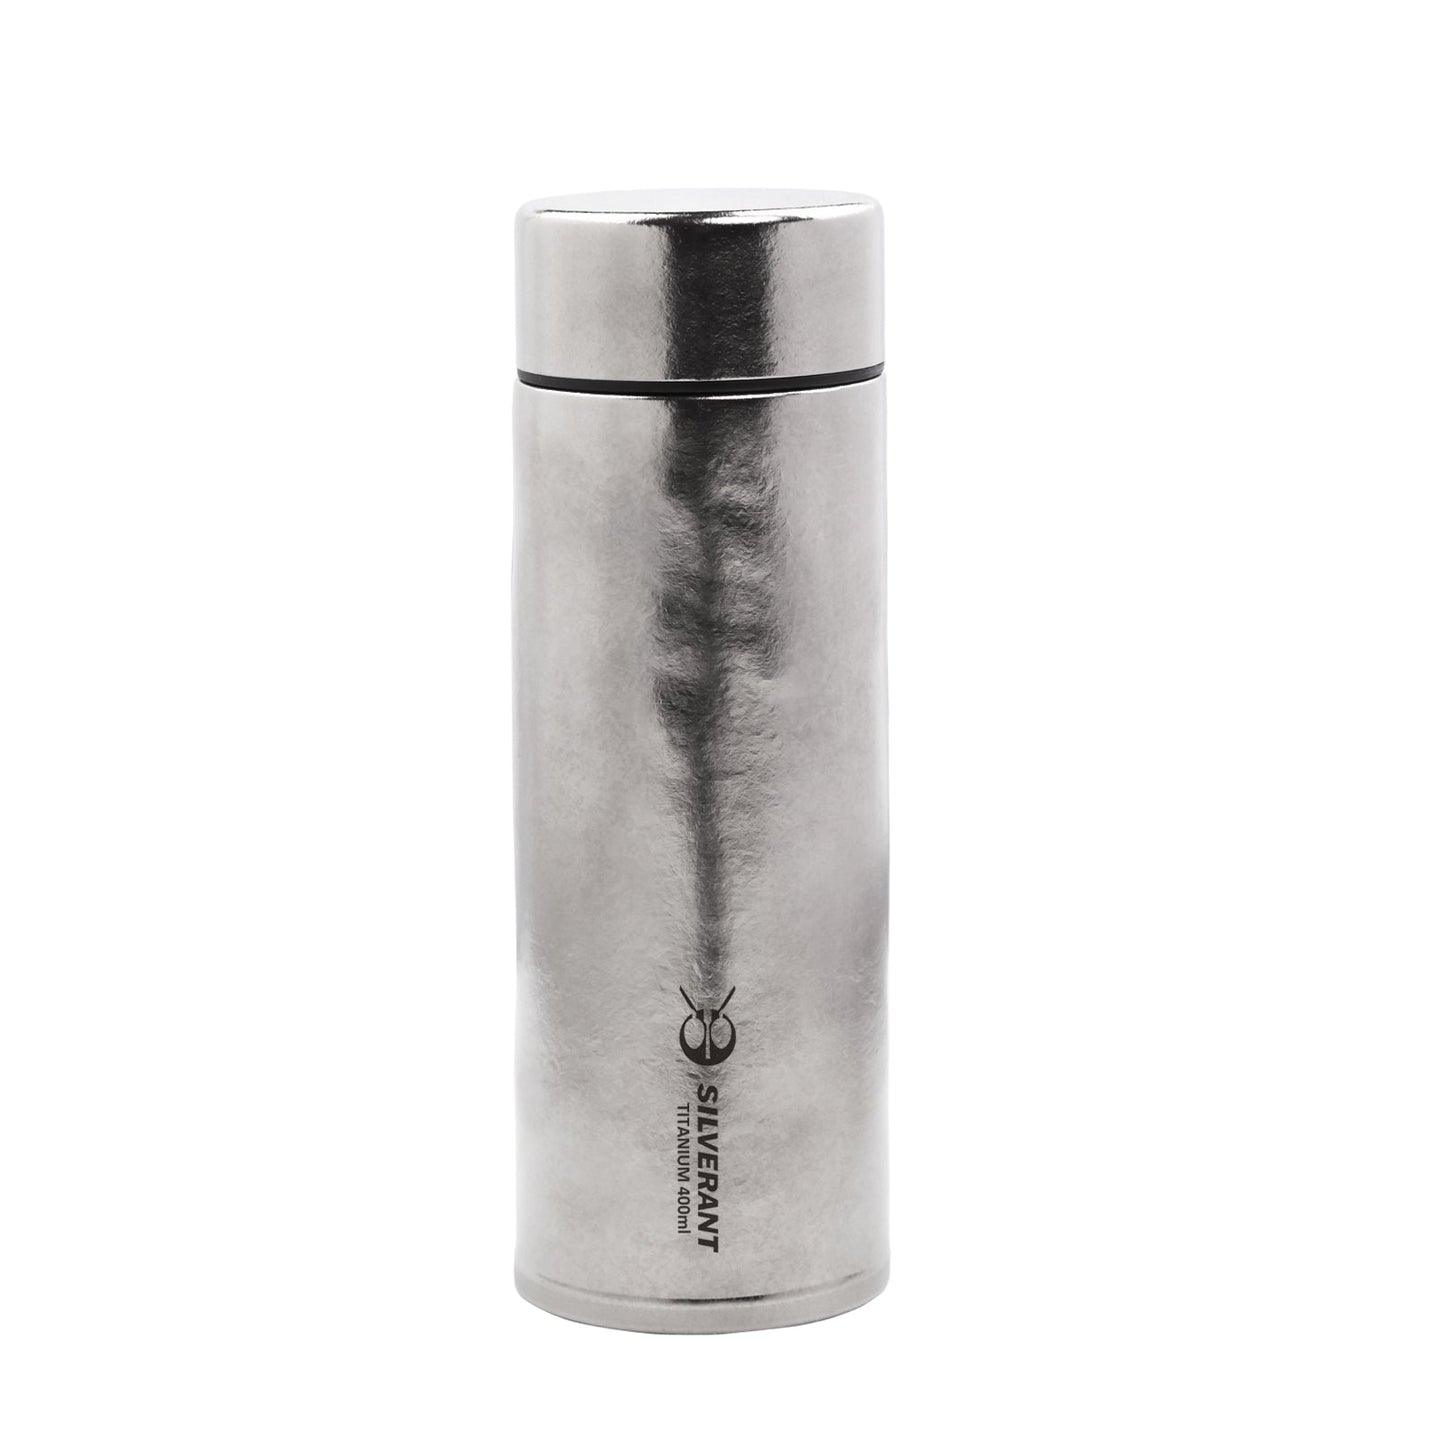 
                  
                    Titanium Double-Wall Insulated Thermos Flask 400ml/14fl oz - SilverAnt Outdoors
                  
                